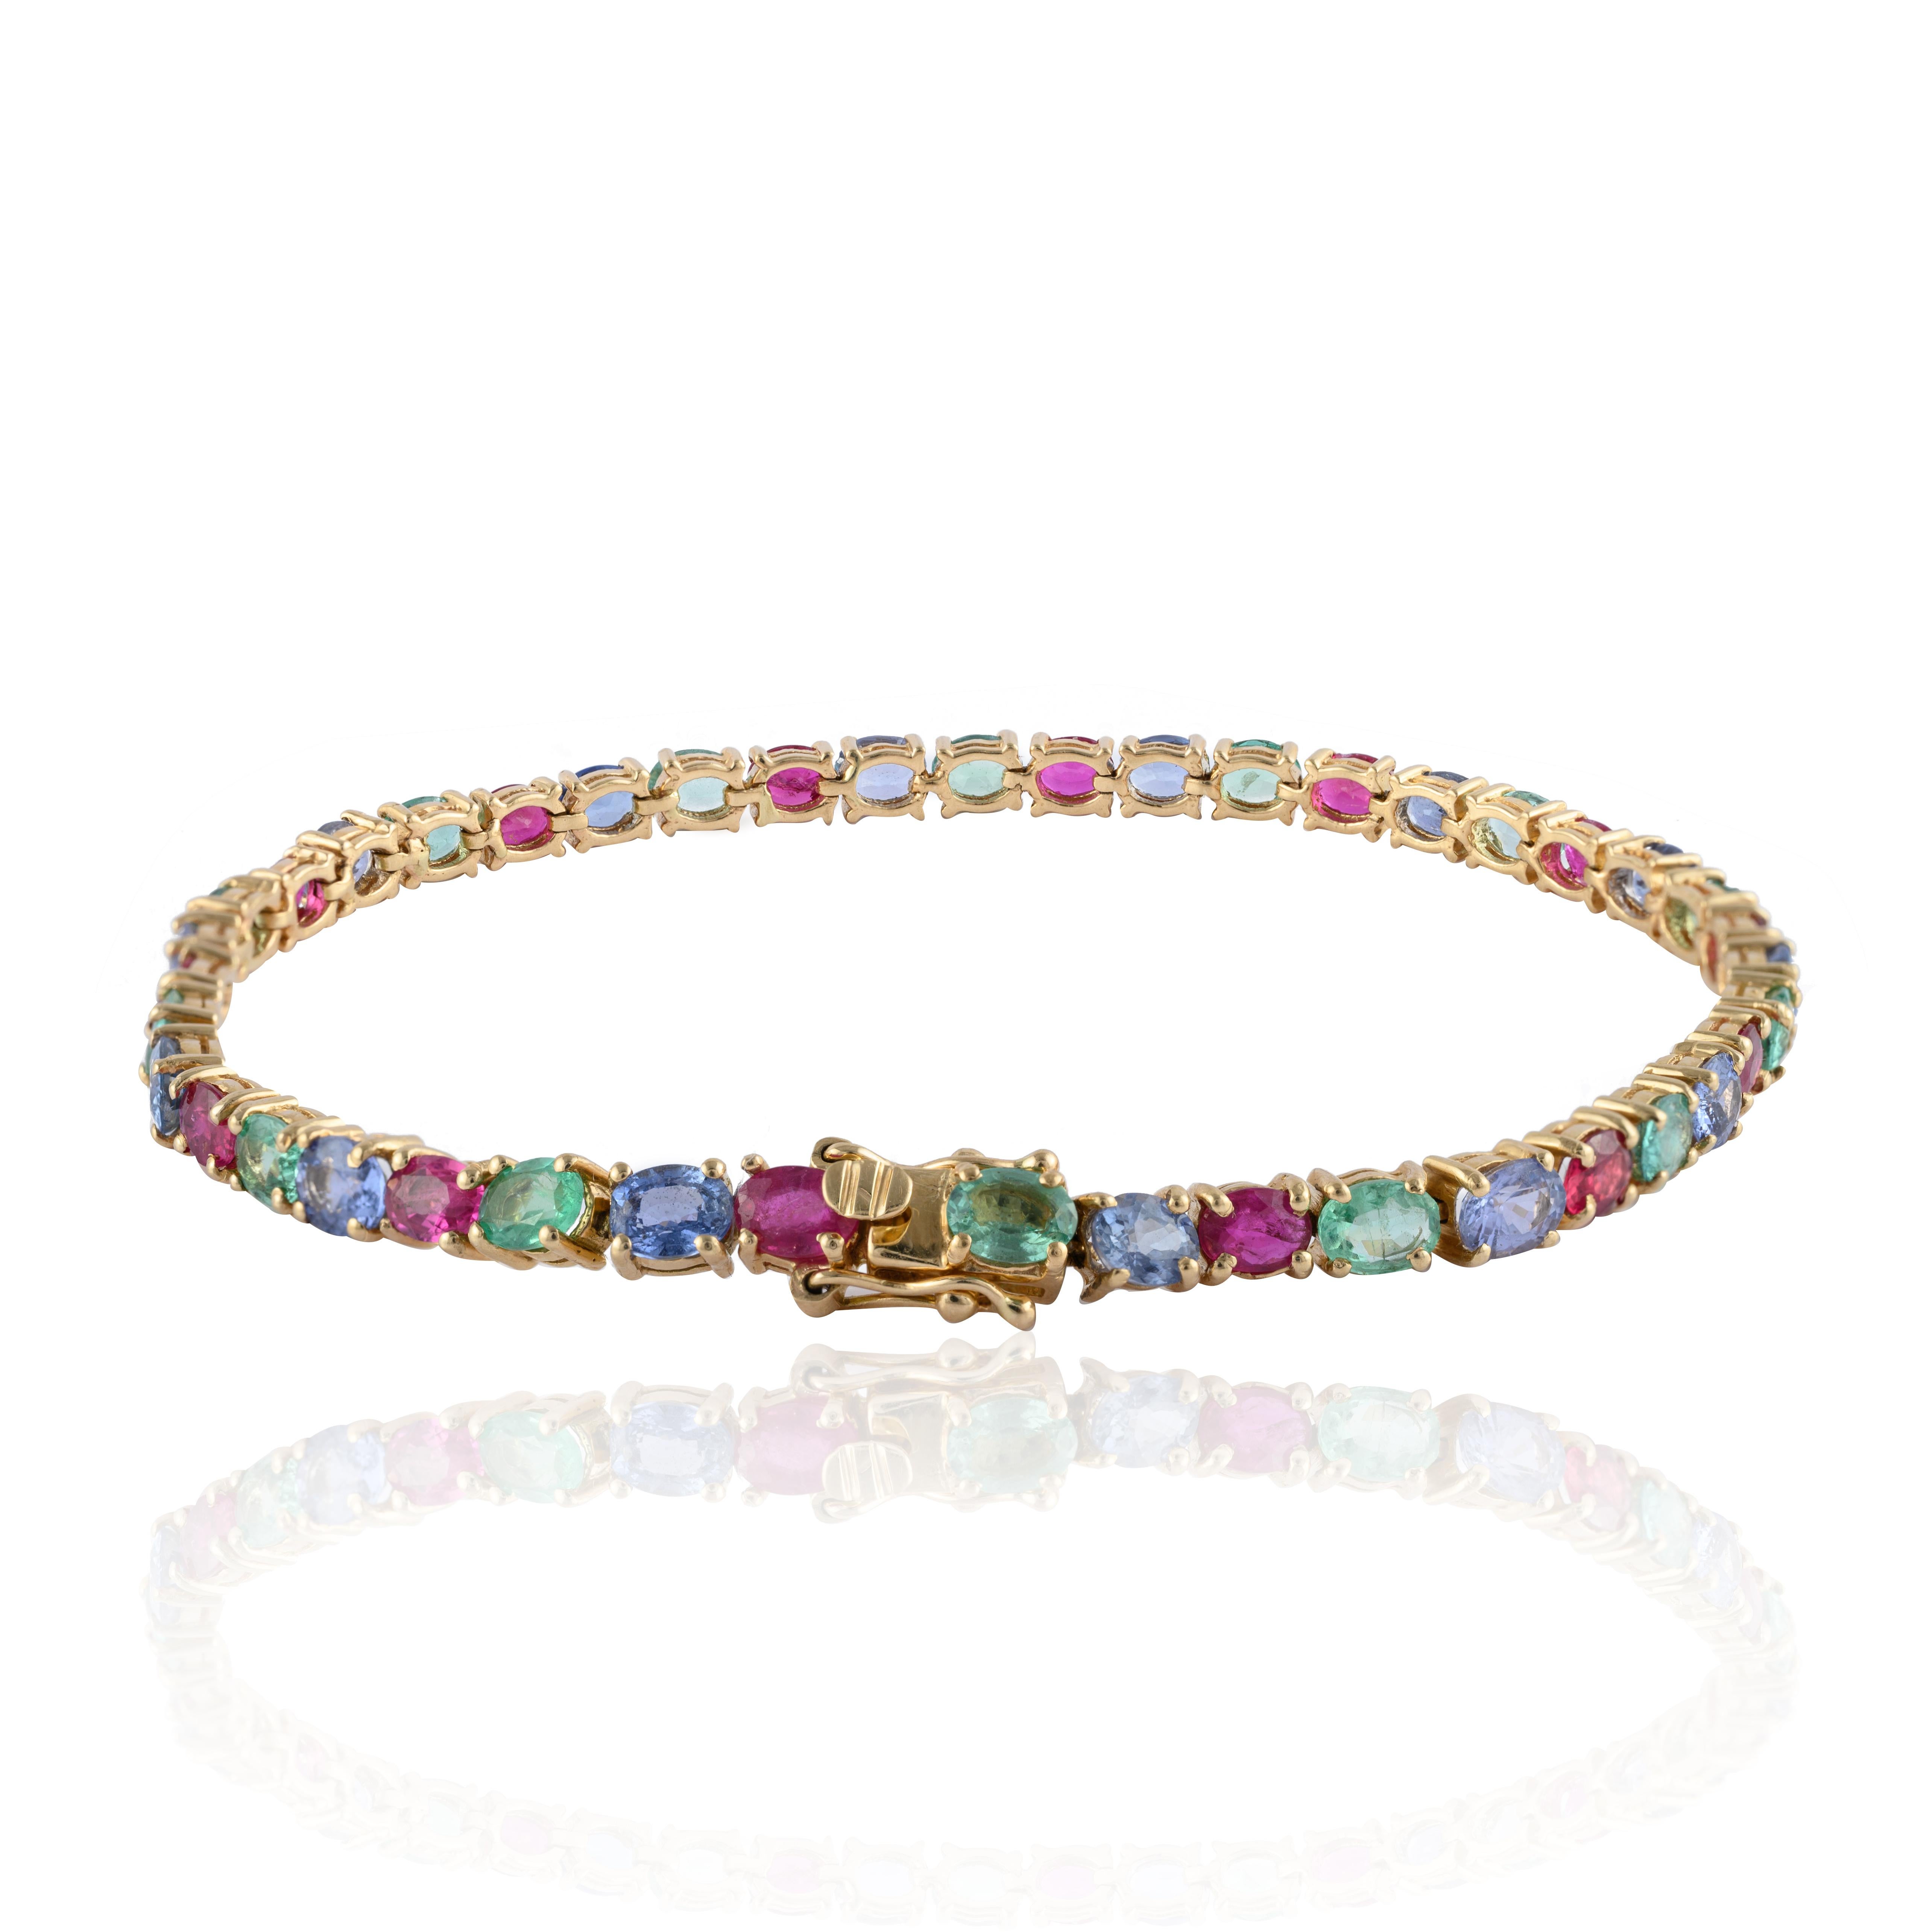 Exquisite Emerald, Ruby and Sapphire Tennis Bracelet in 14K gold showcases 42 endlessly sparkling natural rubies, emeralds and sapphires weighing 15.25 carats. It measures 7.5 inches long in length. 
Ruby improves mental health, sapphire stimulates